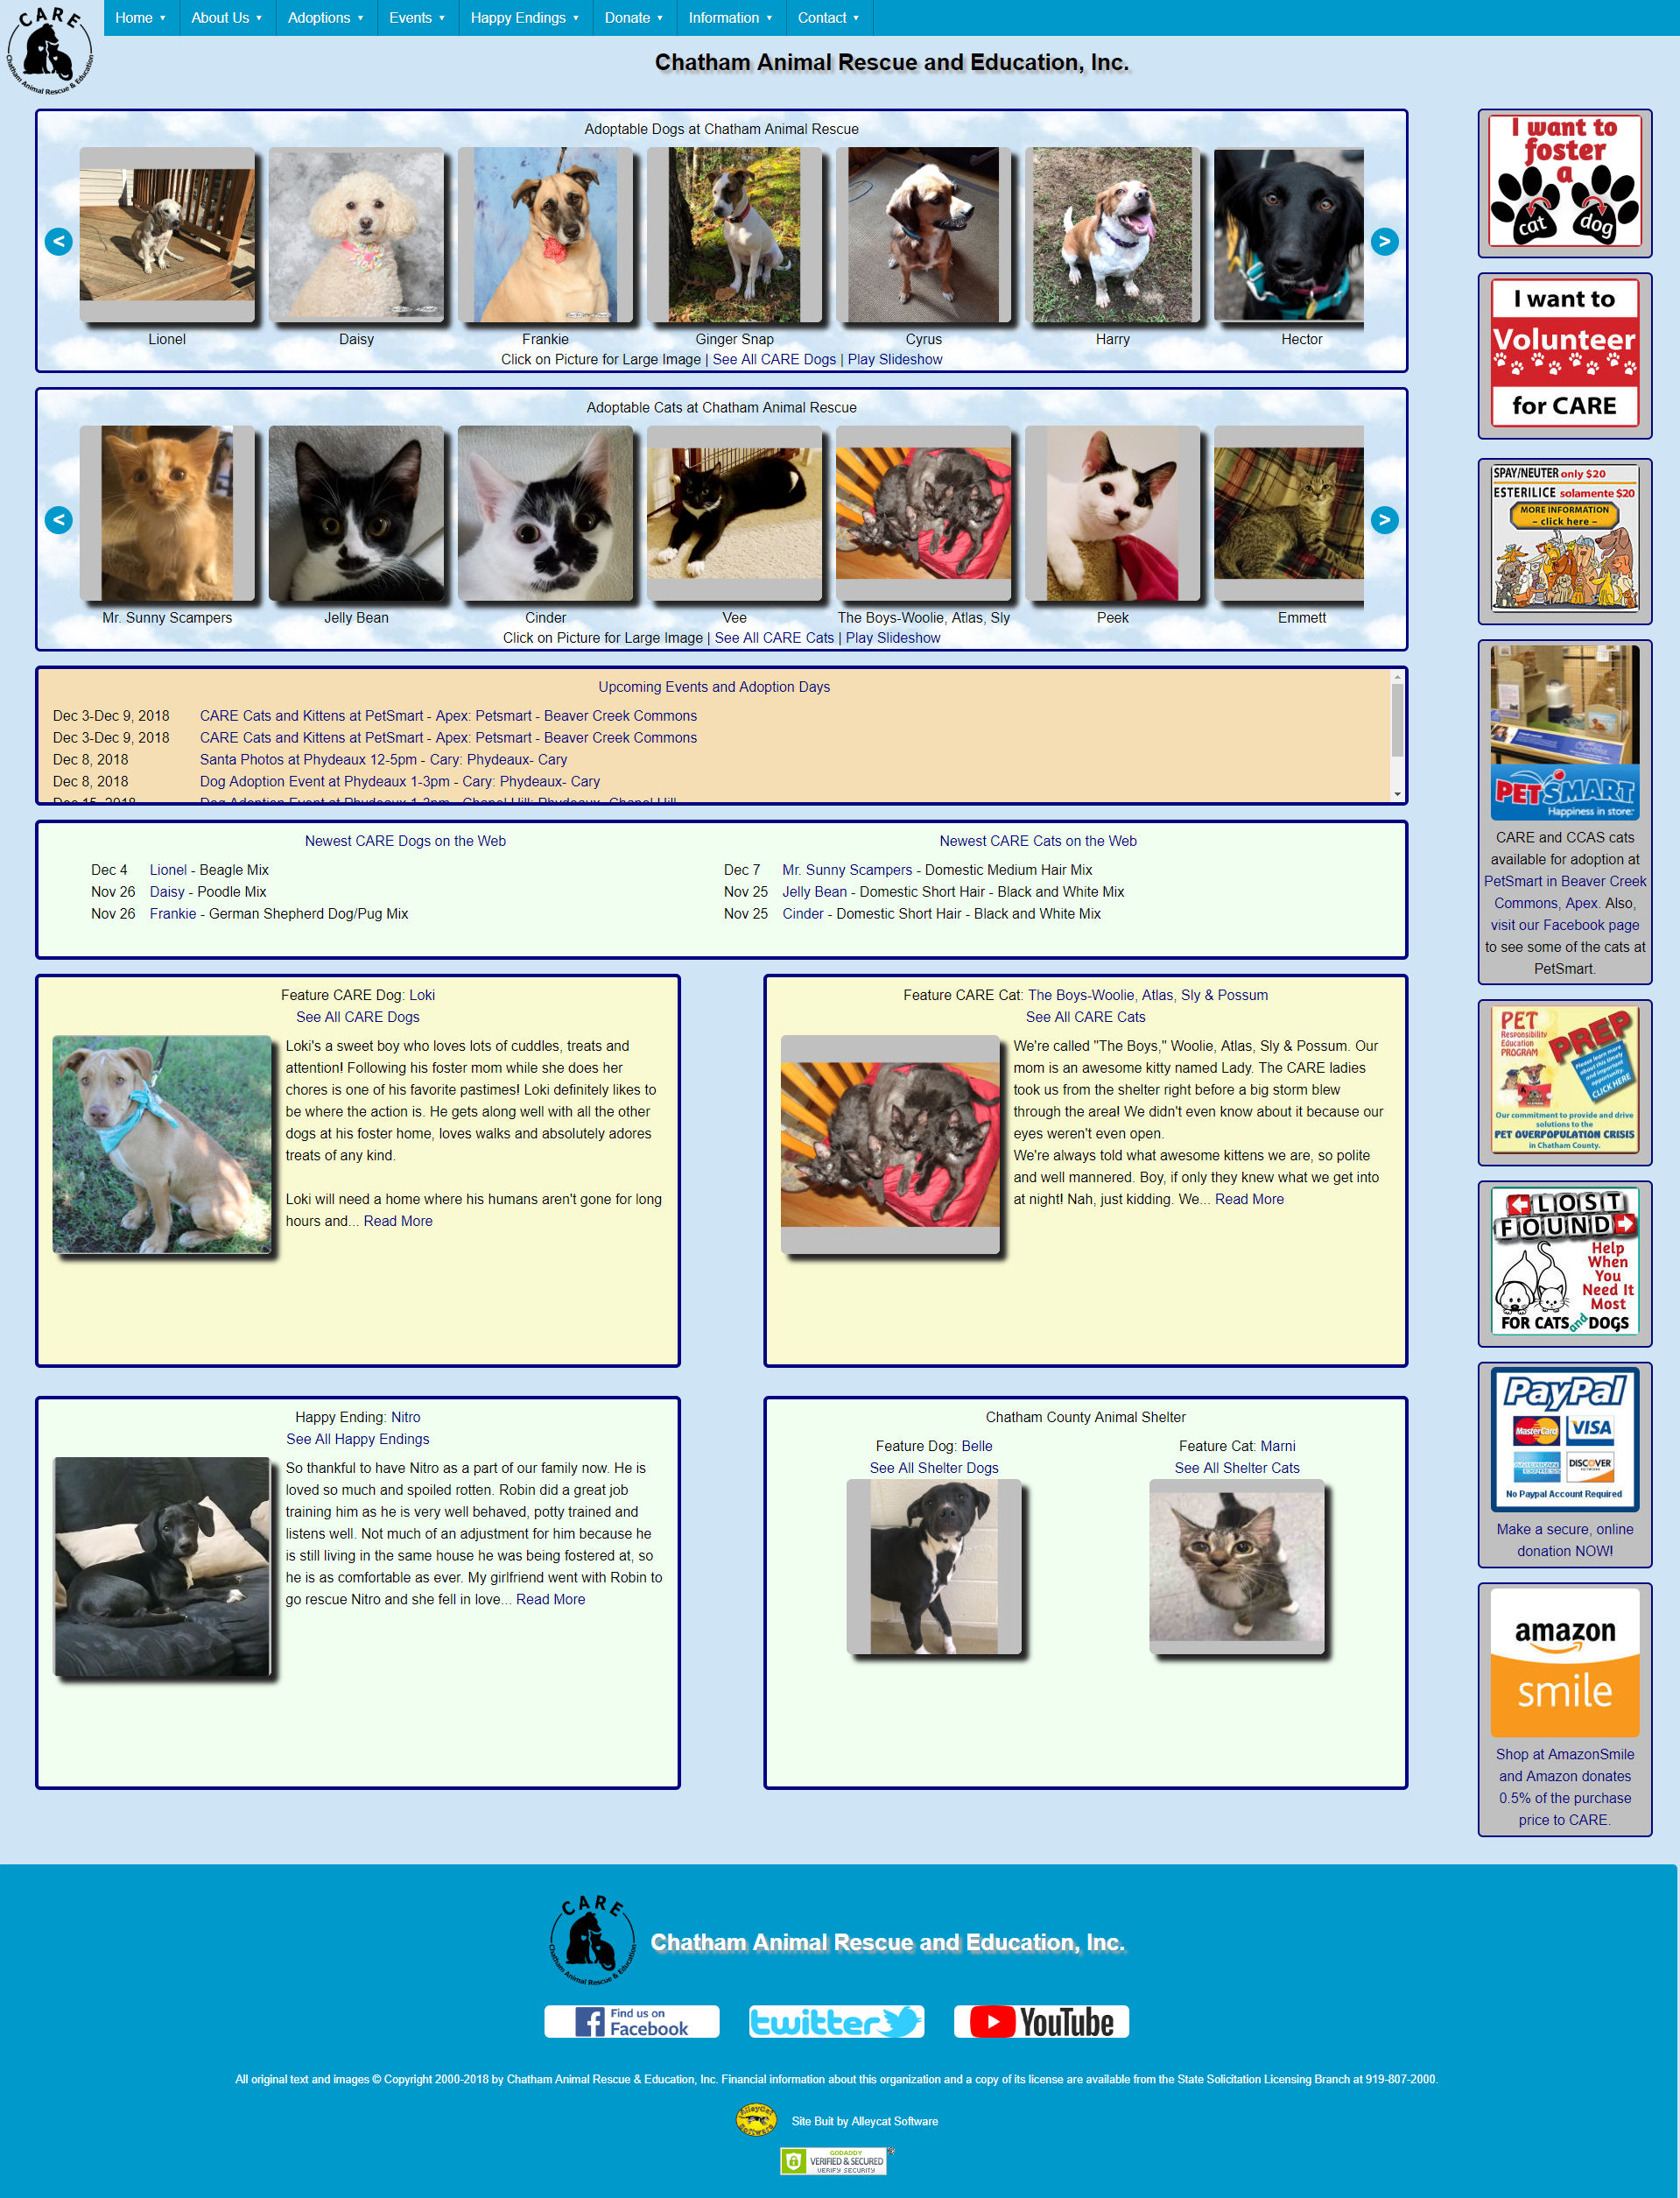 Chatham Animal Rescue and Education Web Site